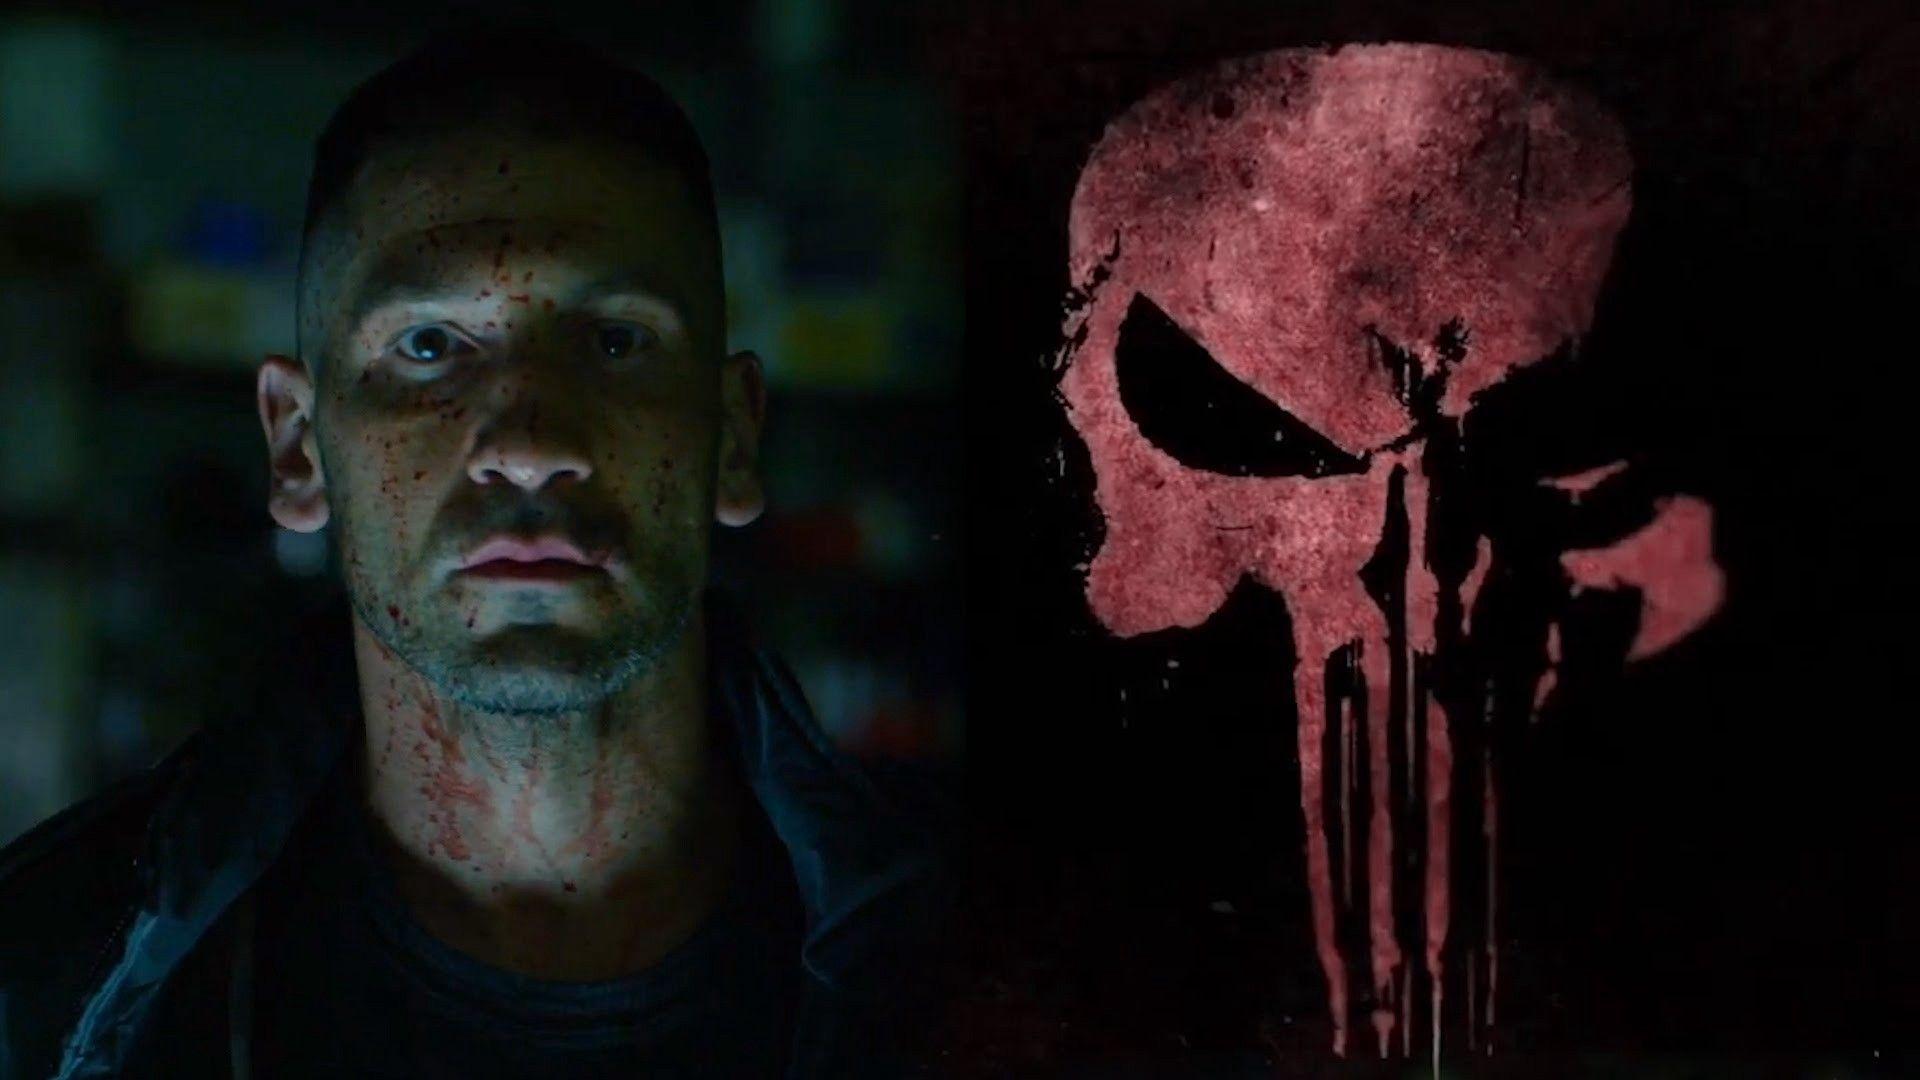 THE PUNISHER is returning to Netflix, but is Frank Castle built to last?